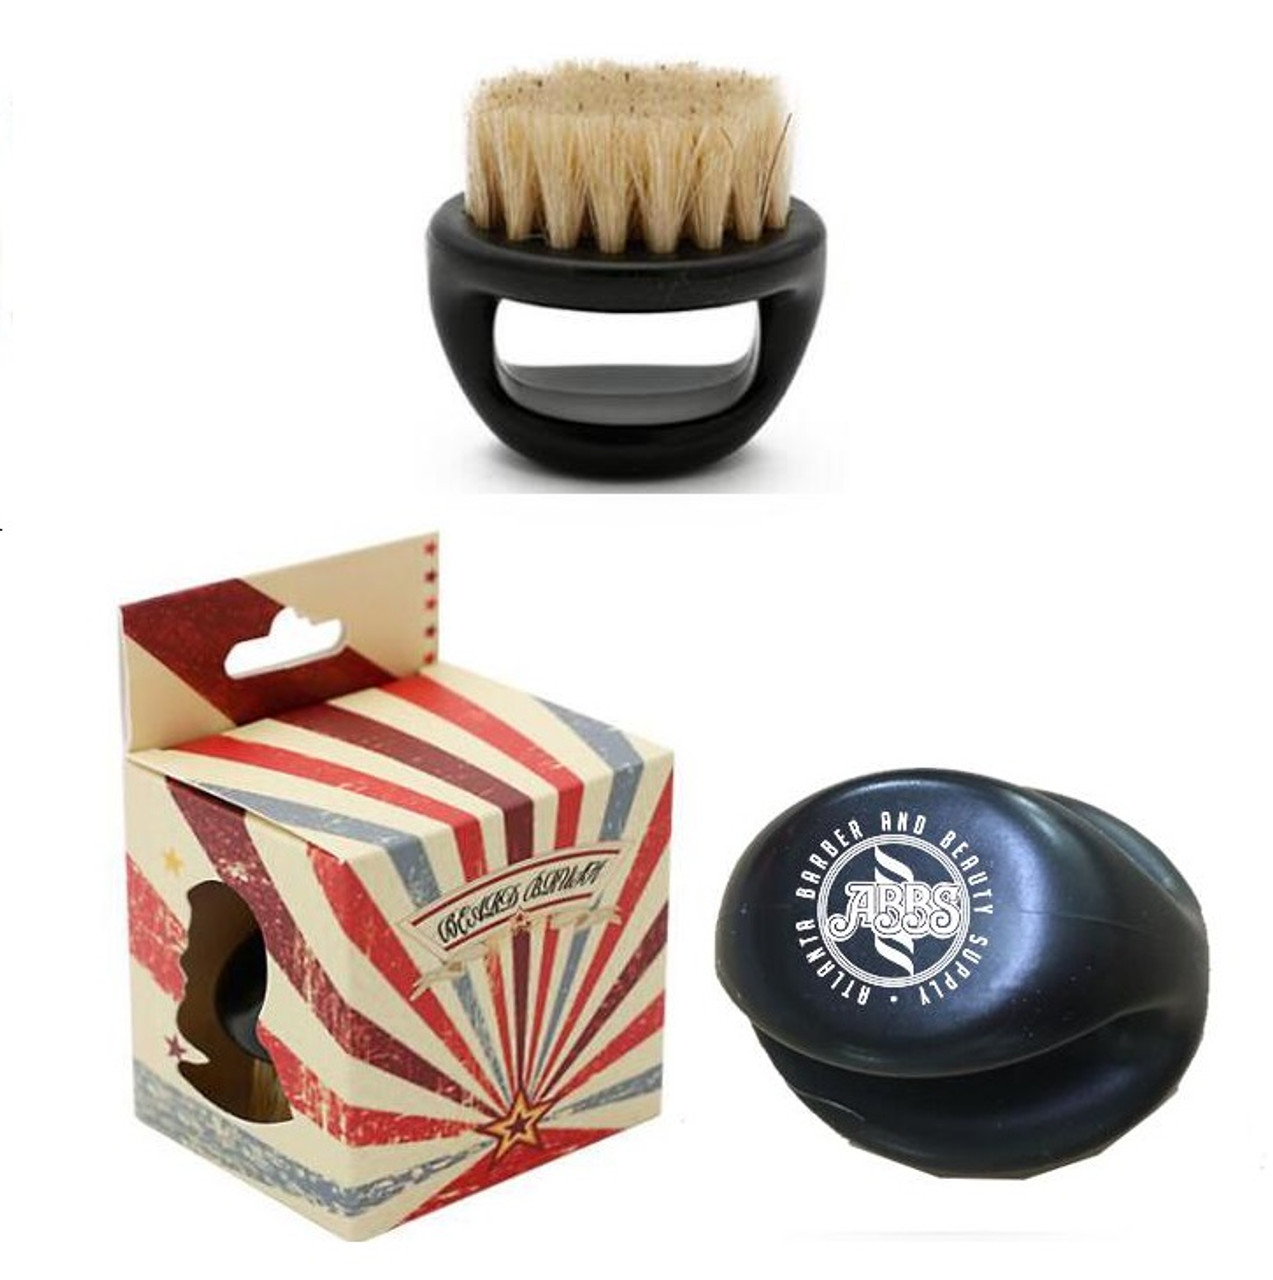 Woody Wax Brushes, Gloves, And Applicator Kits